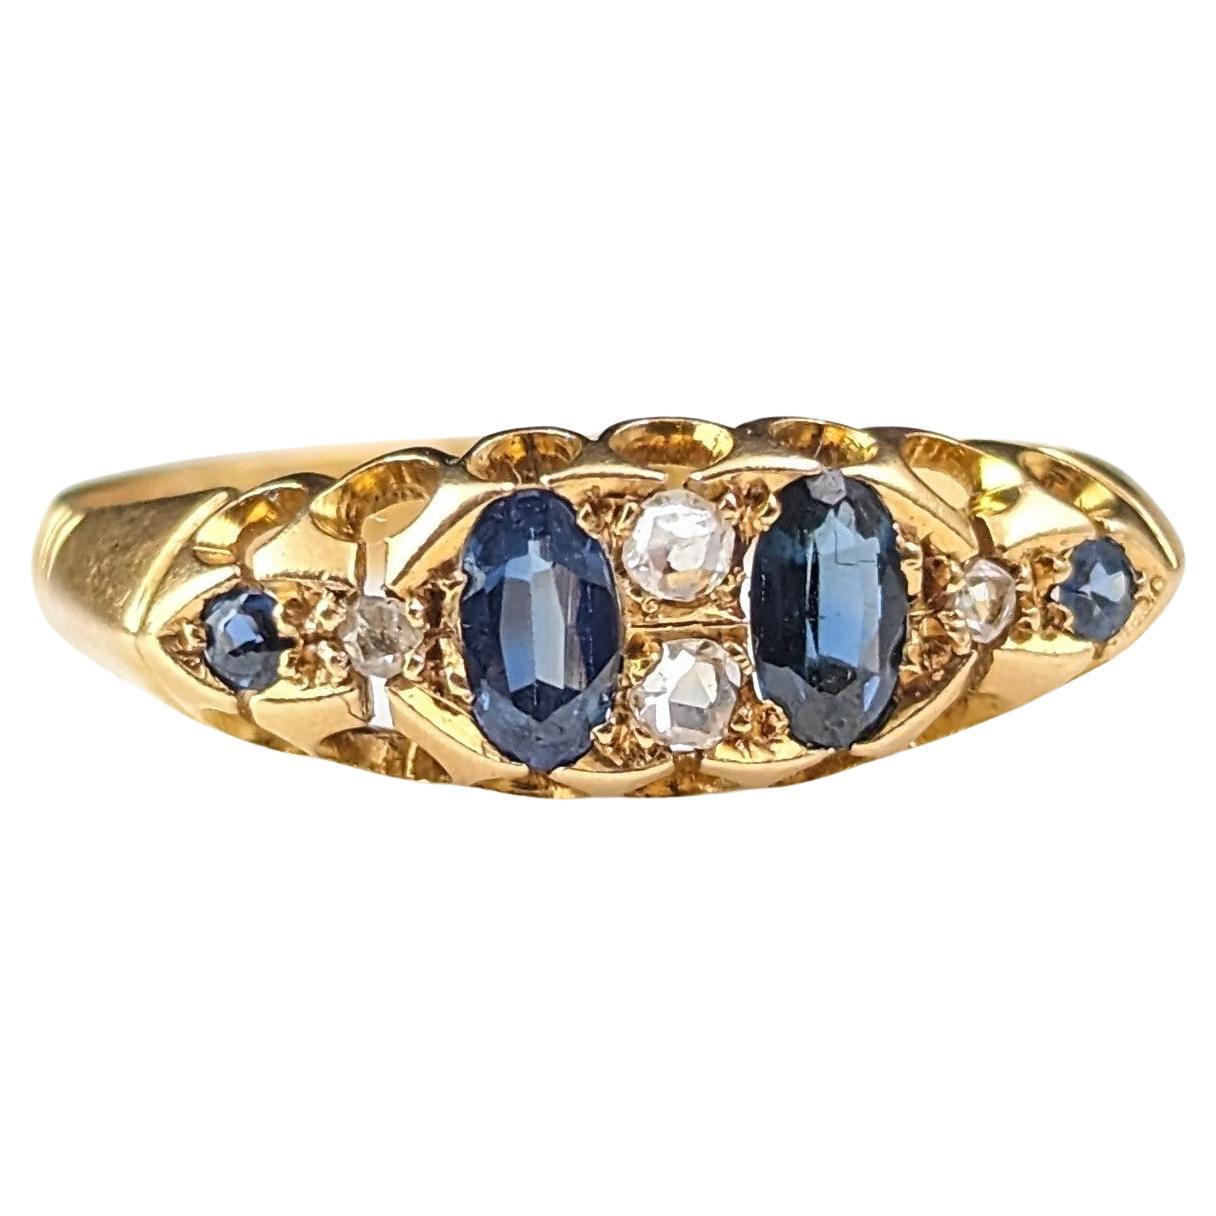 Antique Sapphire and Diamond ring, 18k gold, Edwardian 